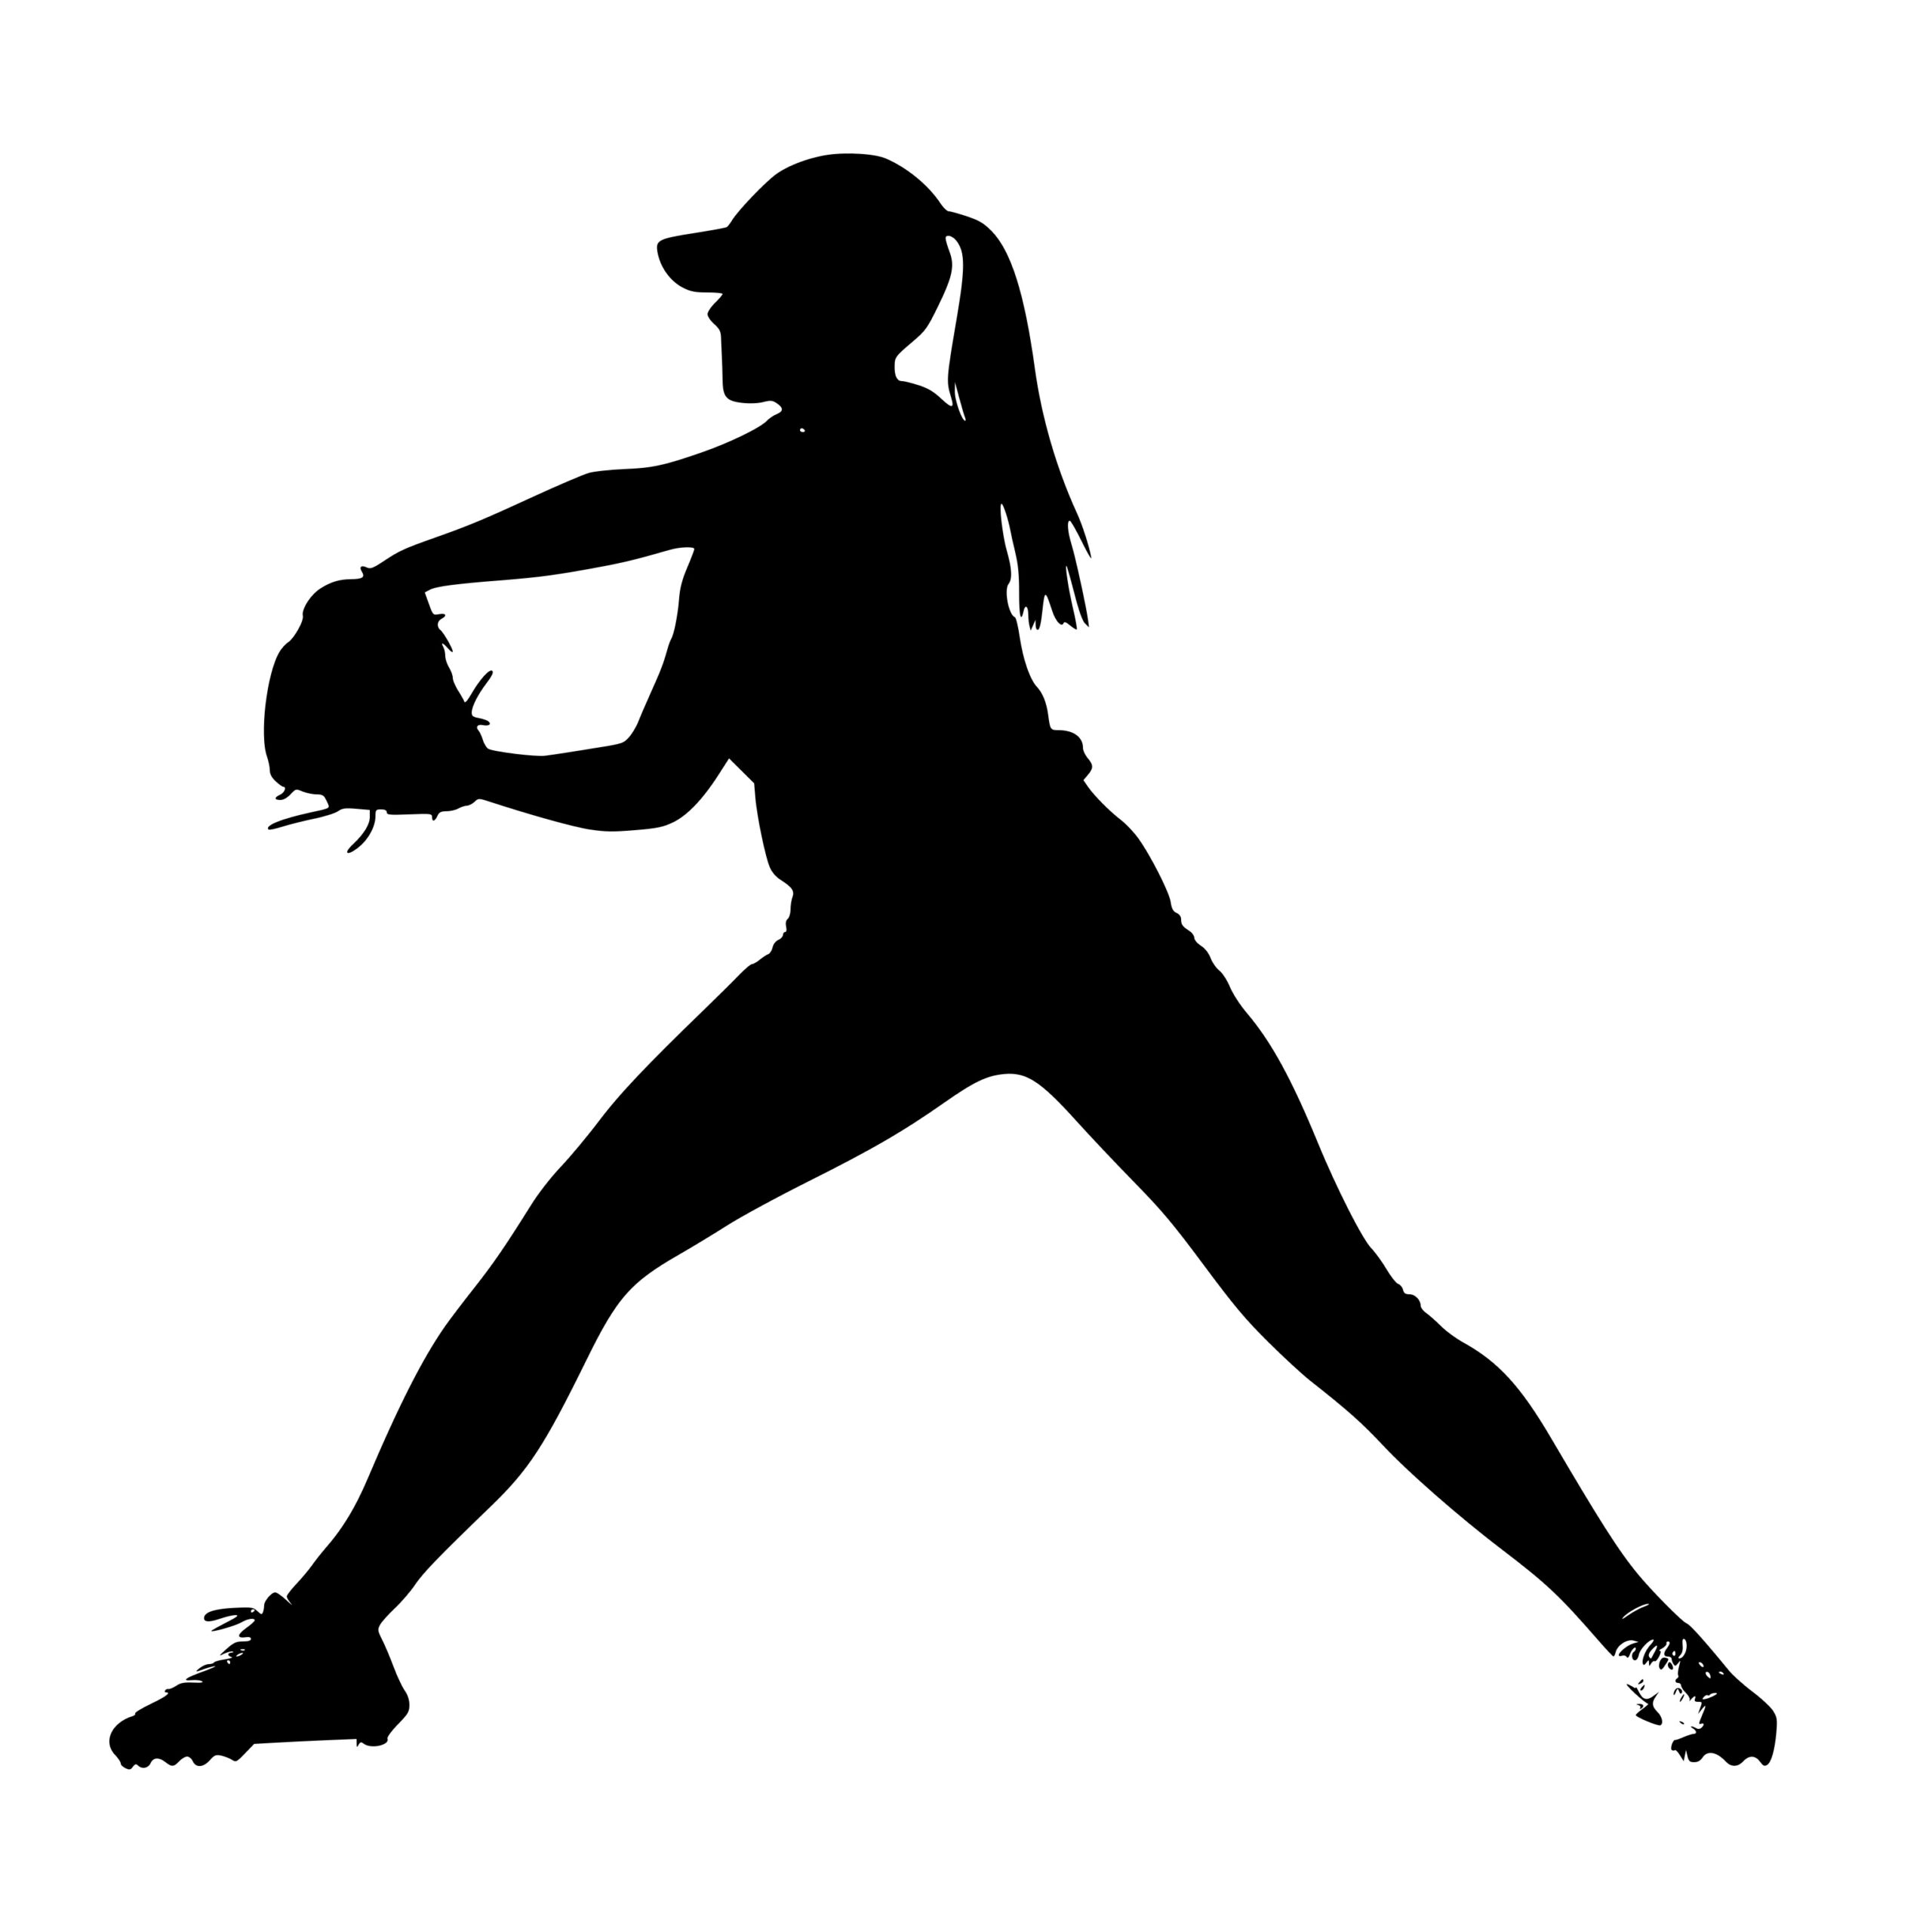 Softball Pitcher Silhouette SVG File for Cricut, Silhouette, Laser Machines